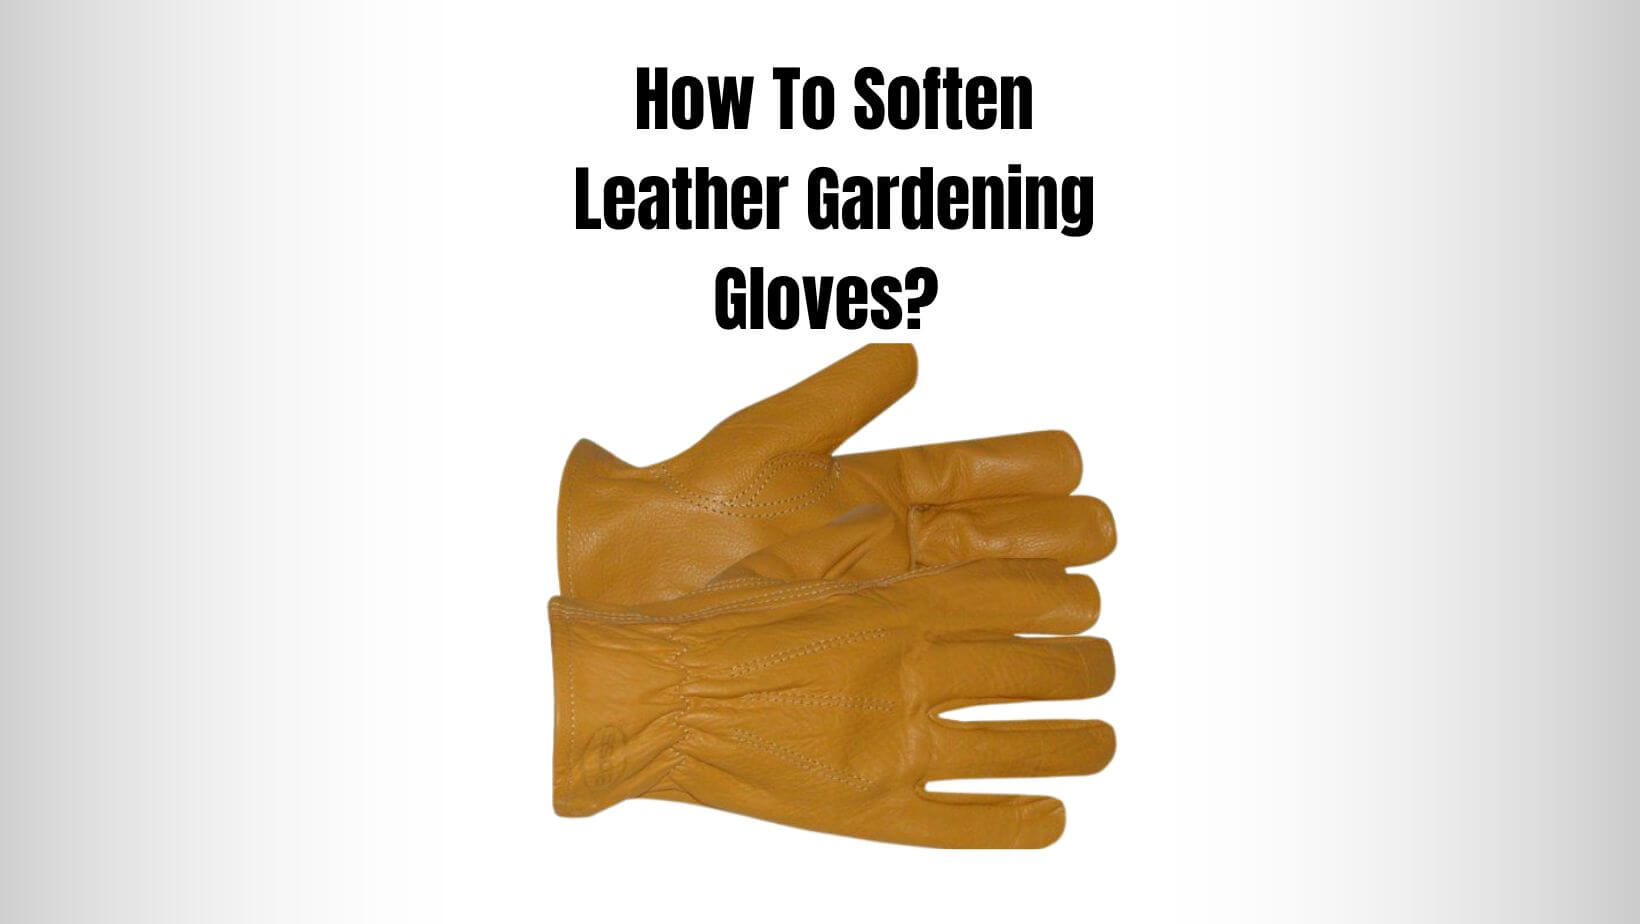 How To Soften Leather Gardening Gloves?